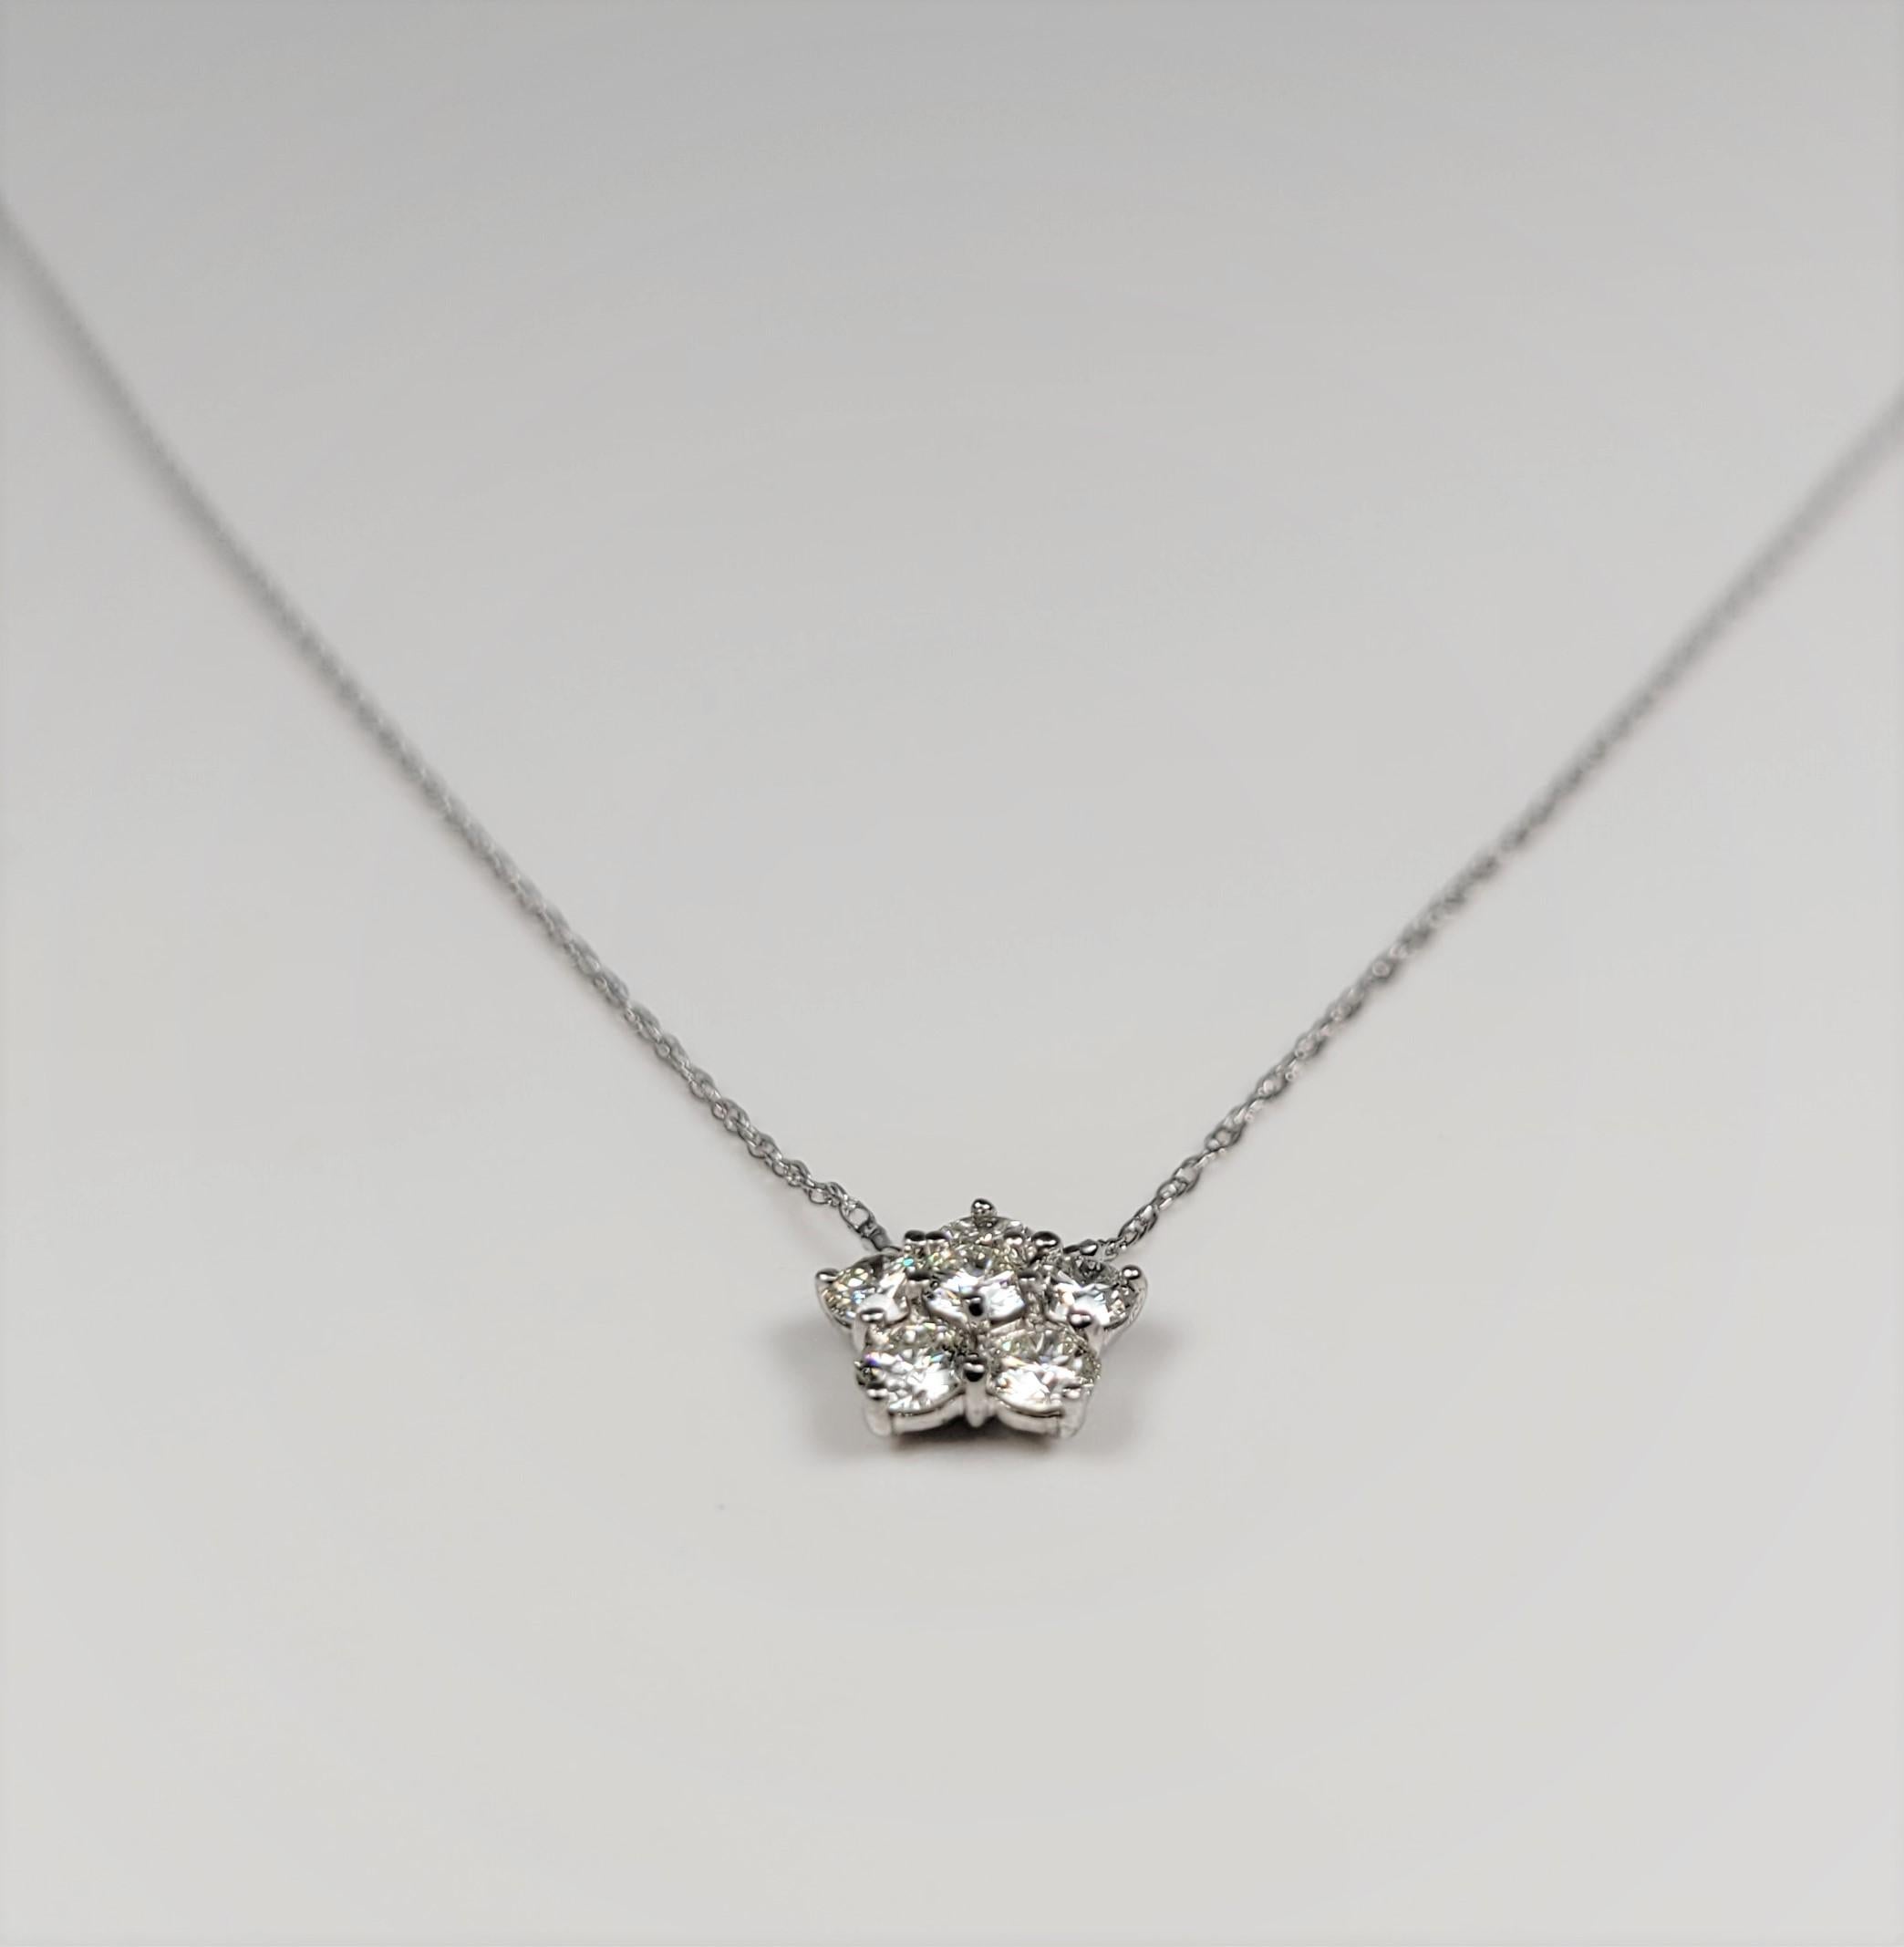 At 17 1/2 inches, this fun diamond necklace can be worn alone, or layered with others!